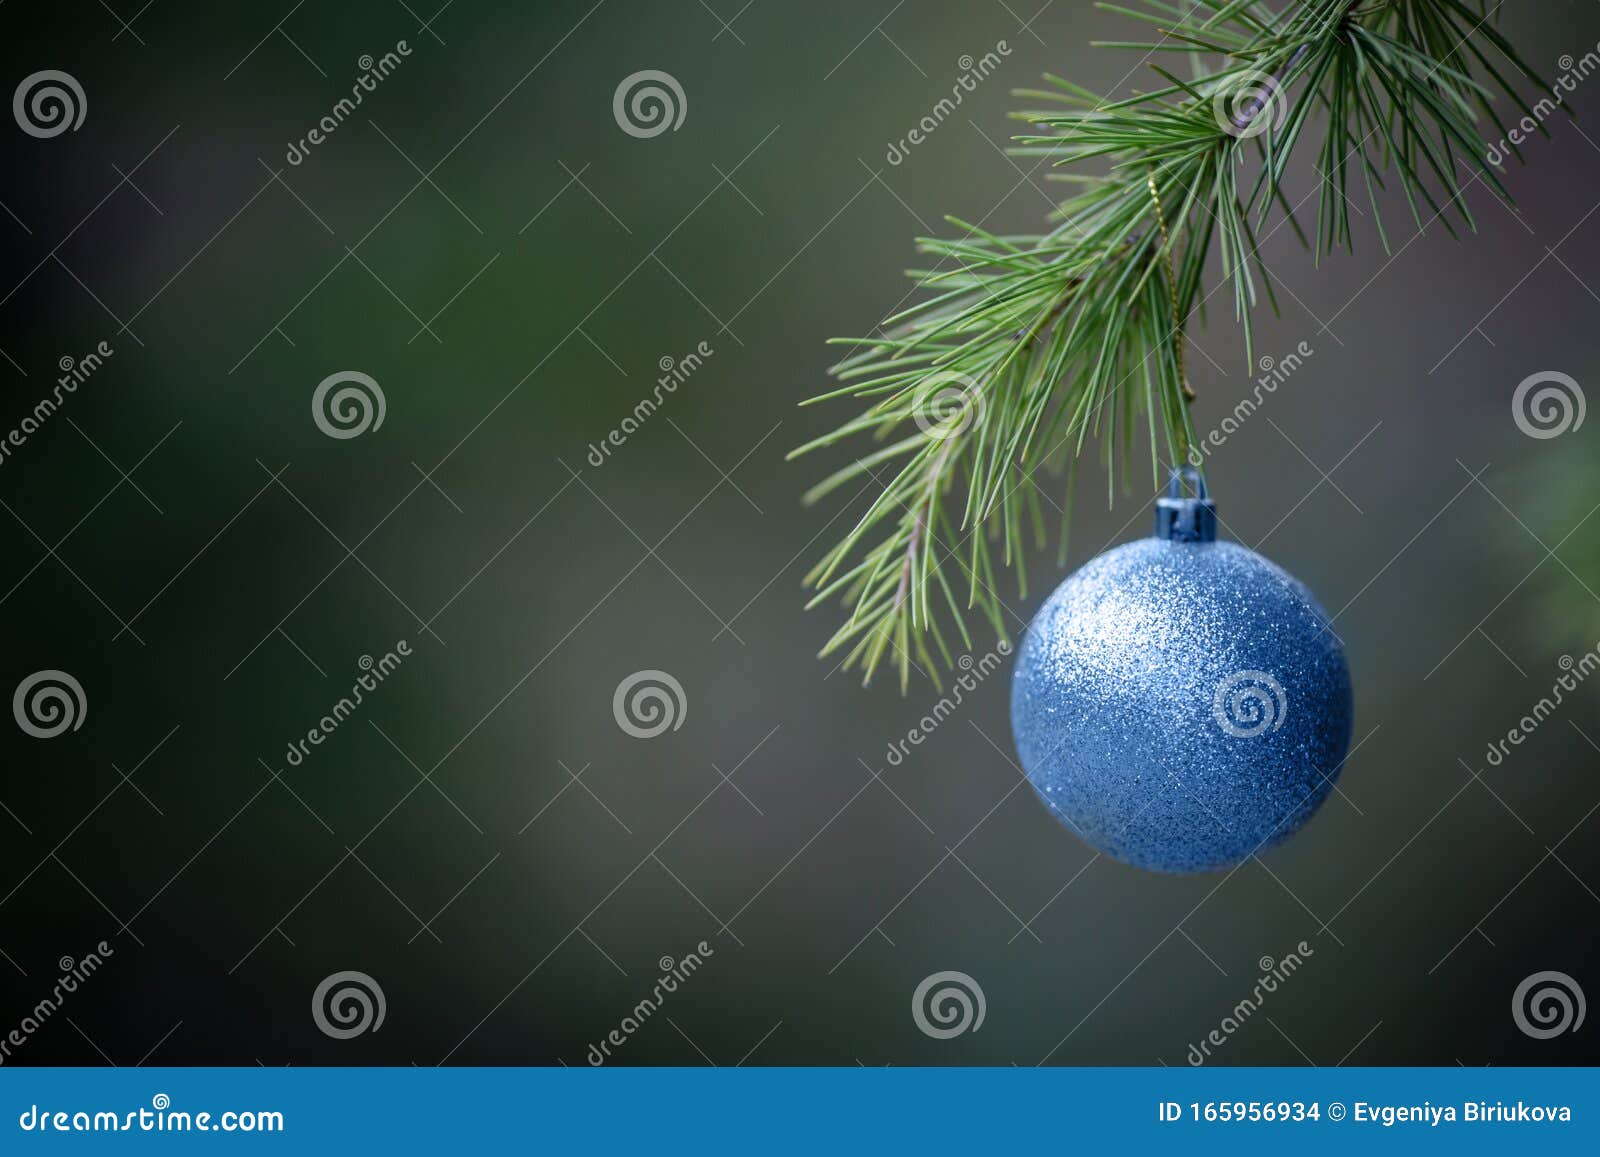 Close-up View of Blue Ball As Decoration Hanging on the Branches of a ...